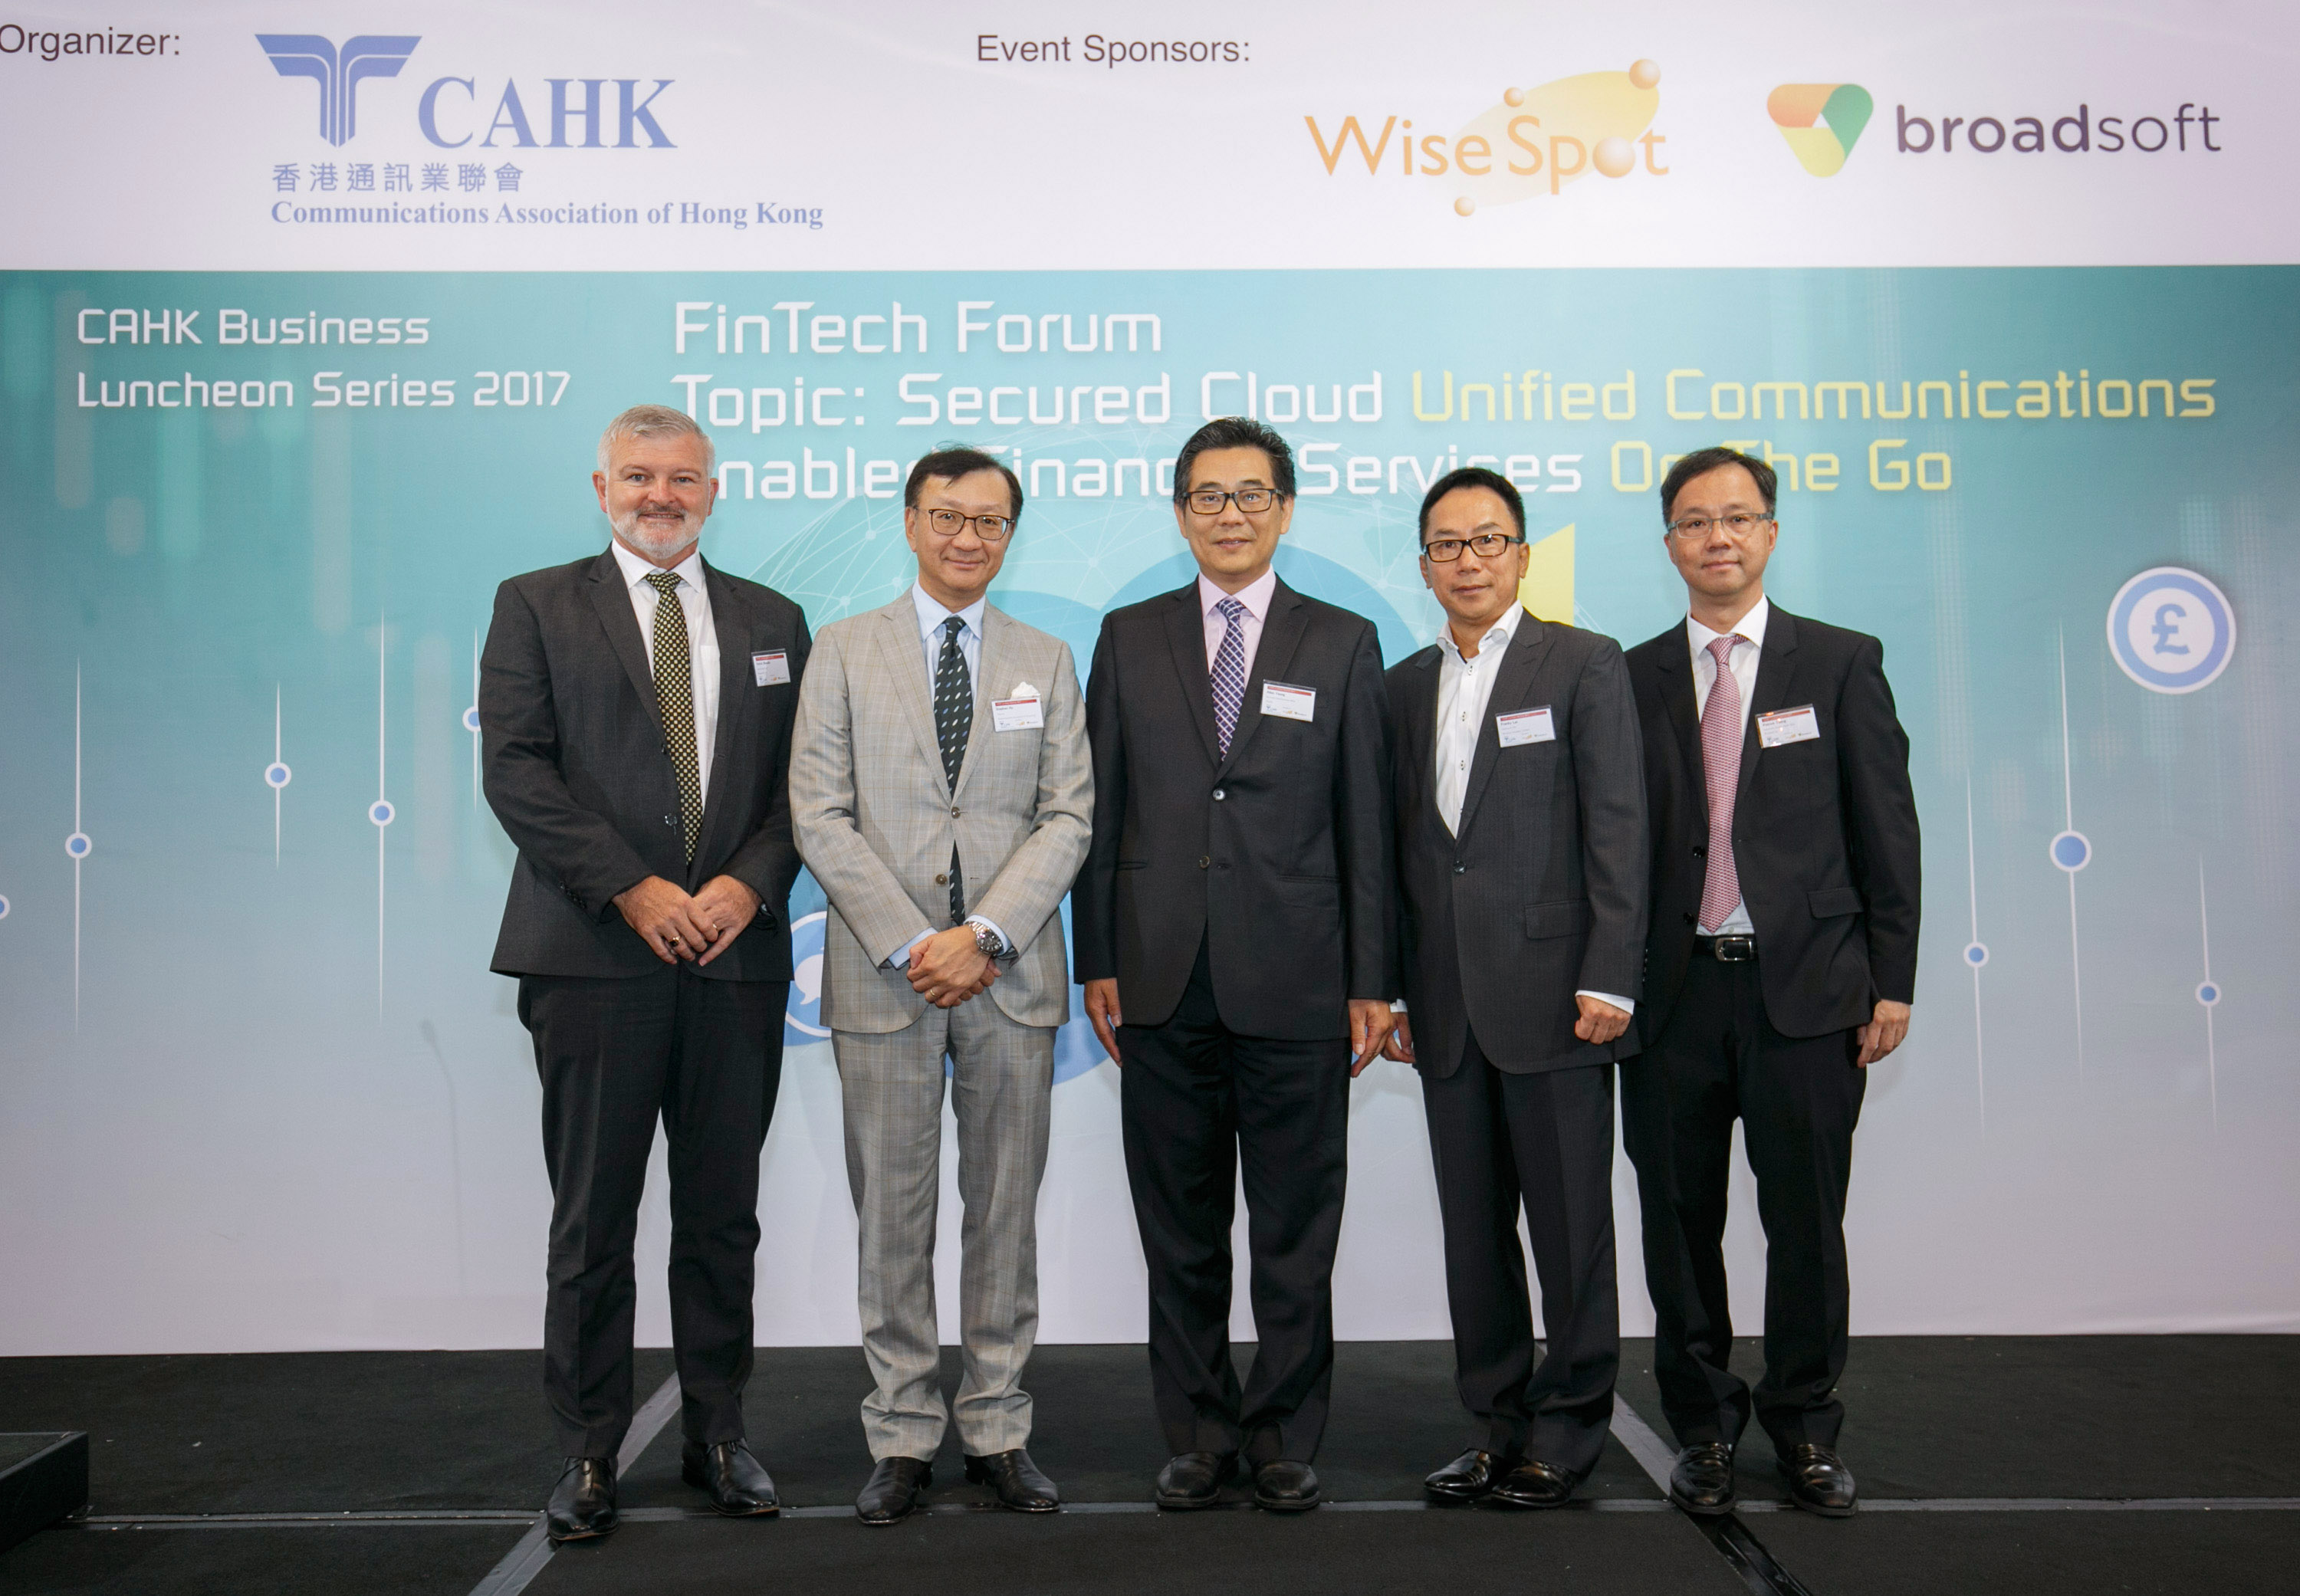 Ir Allen Yeung, Government Chief Information Officer, in group photo with Mr Stephen Ho, Chairman, CAHK (2nd left), Mr Franky Lai, Vice Chairman, CAHK (2nd right), Mr Kelvin Beadle, Vice President Asia, Broadsoft Inc. (leftmost) and Mr Patrick Tsang, Regional Sales Director, Greater China, Broadsoft Inc. (rightmost).